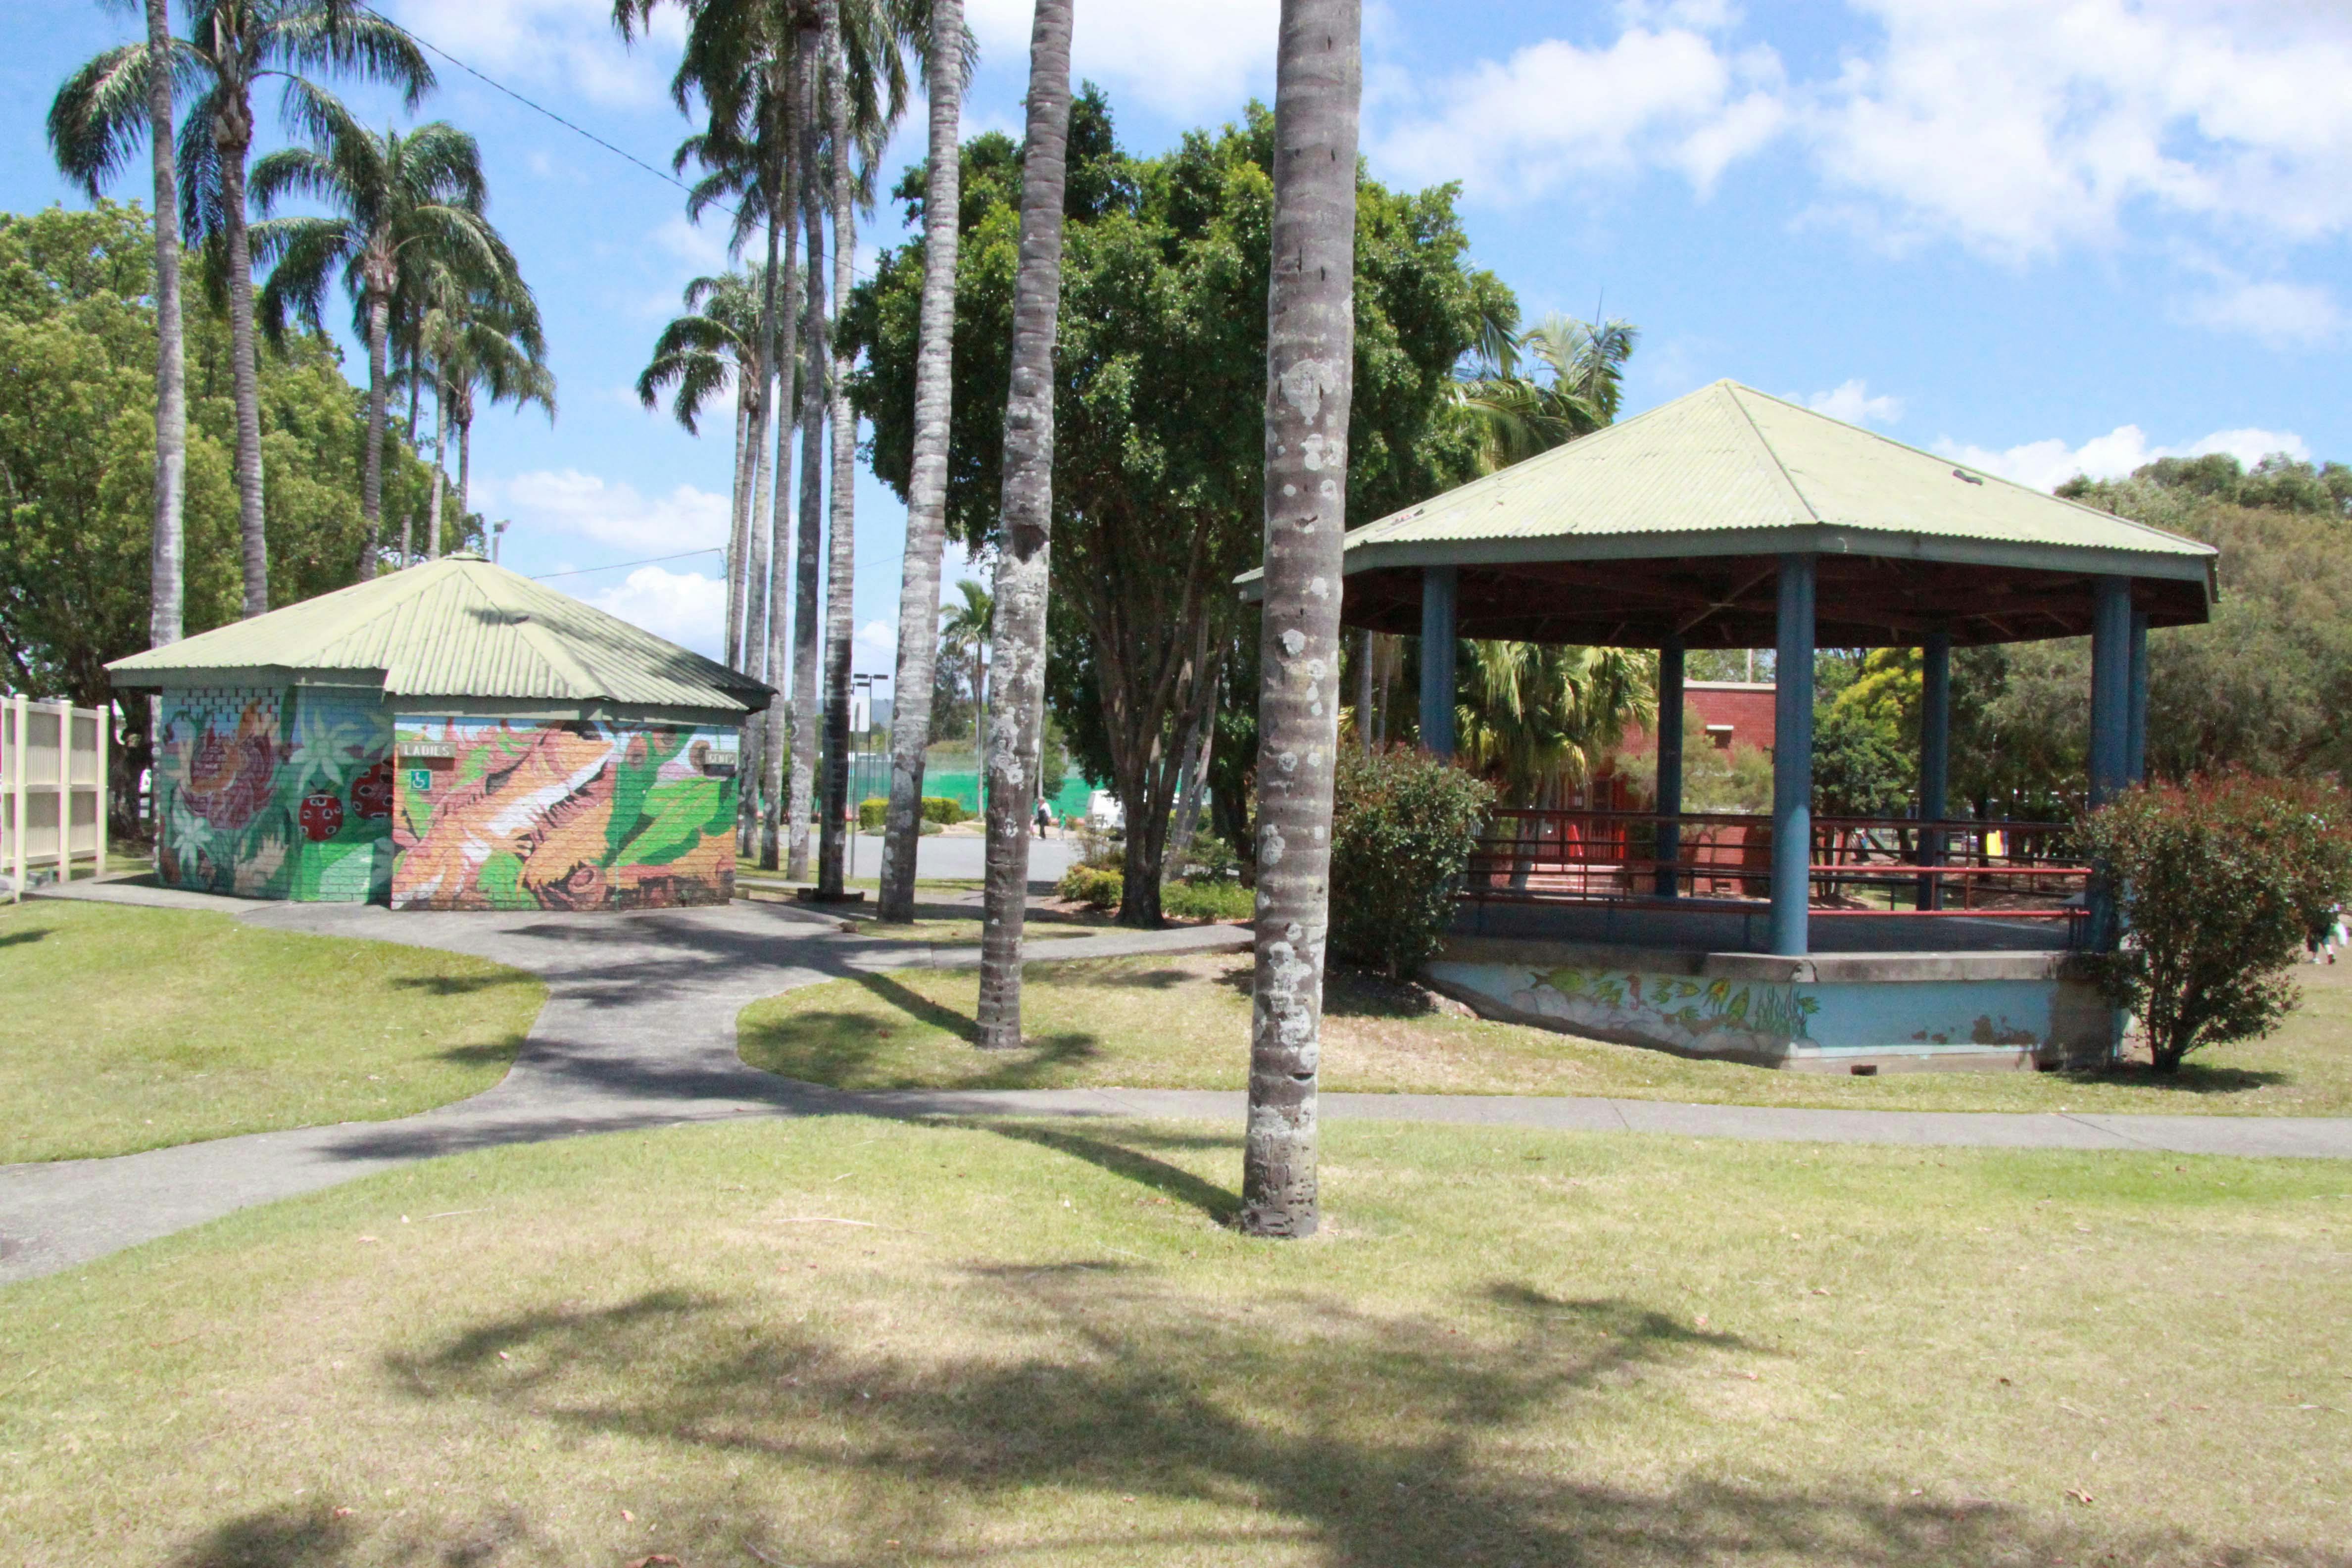 The existing public toilet block (left) and bandstand are proposed for possible removal as part of the upgrade